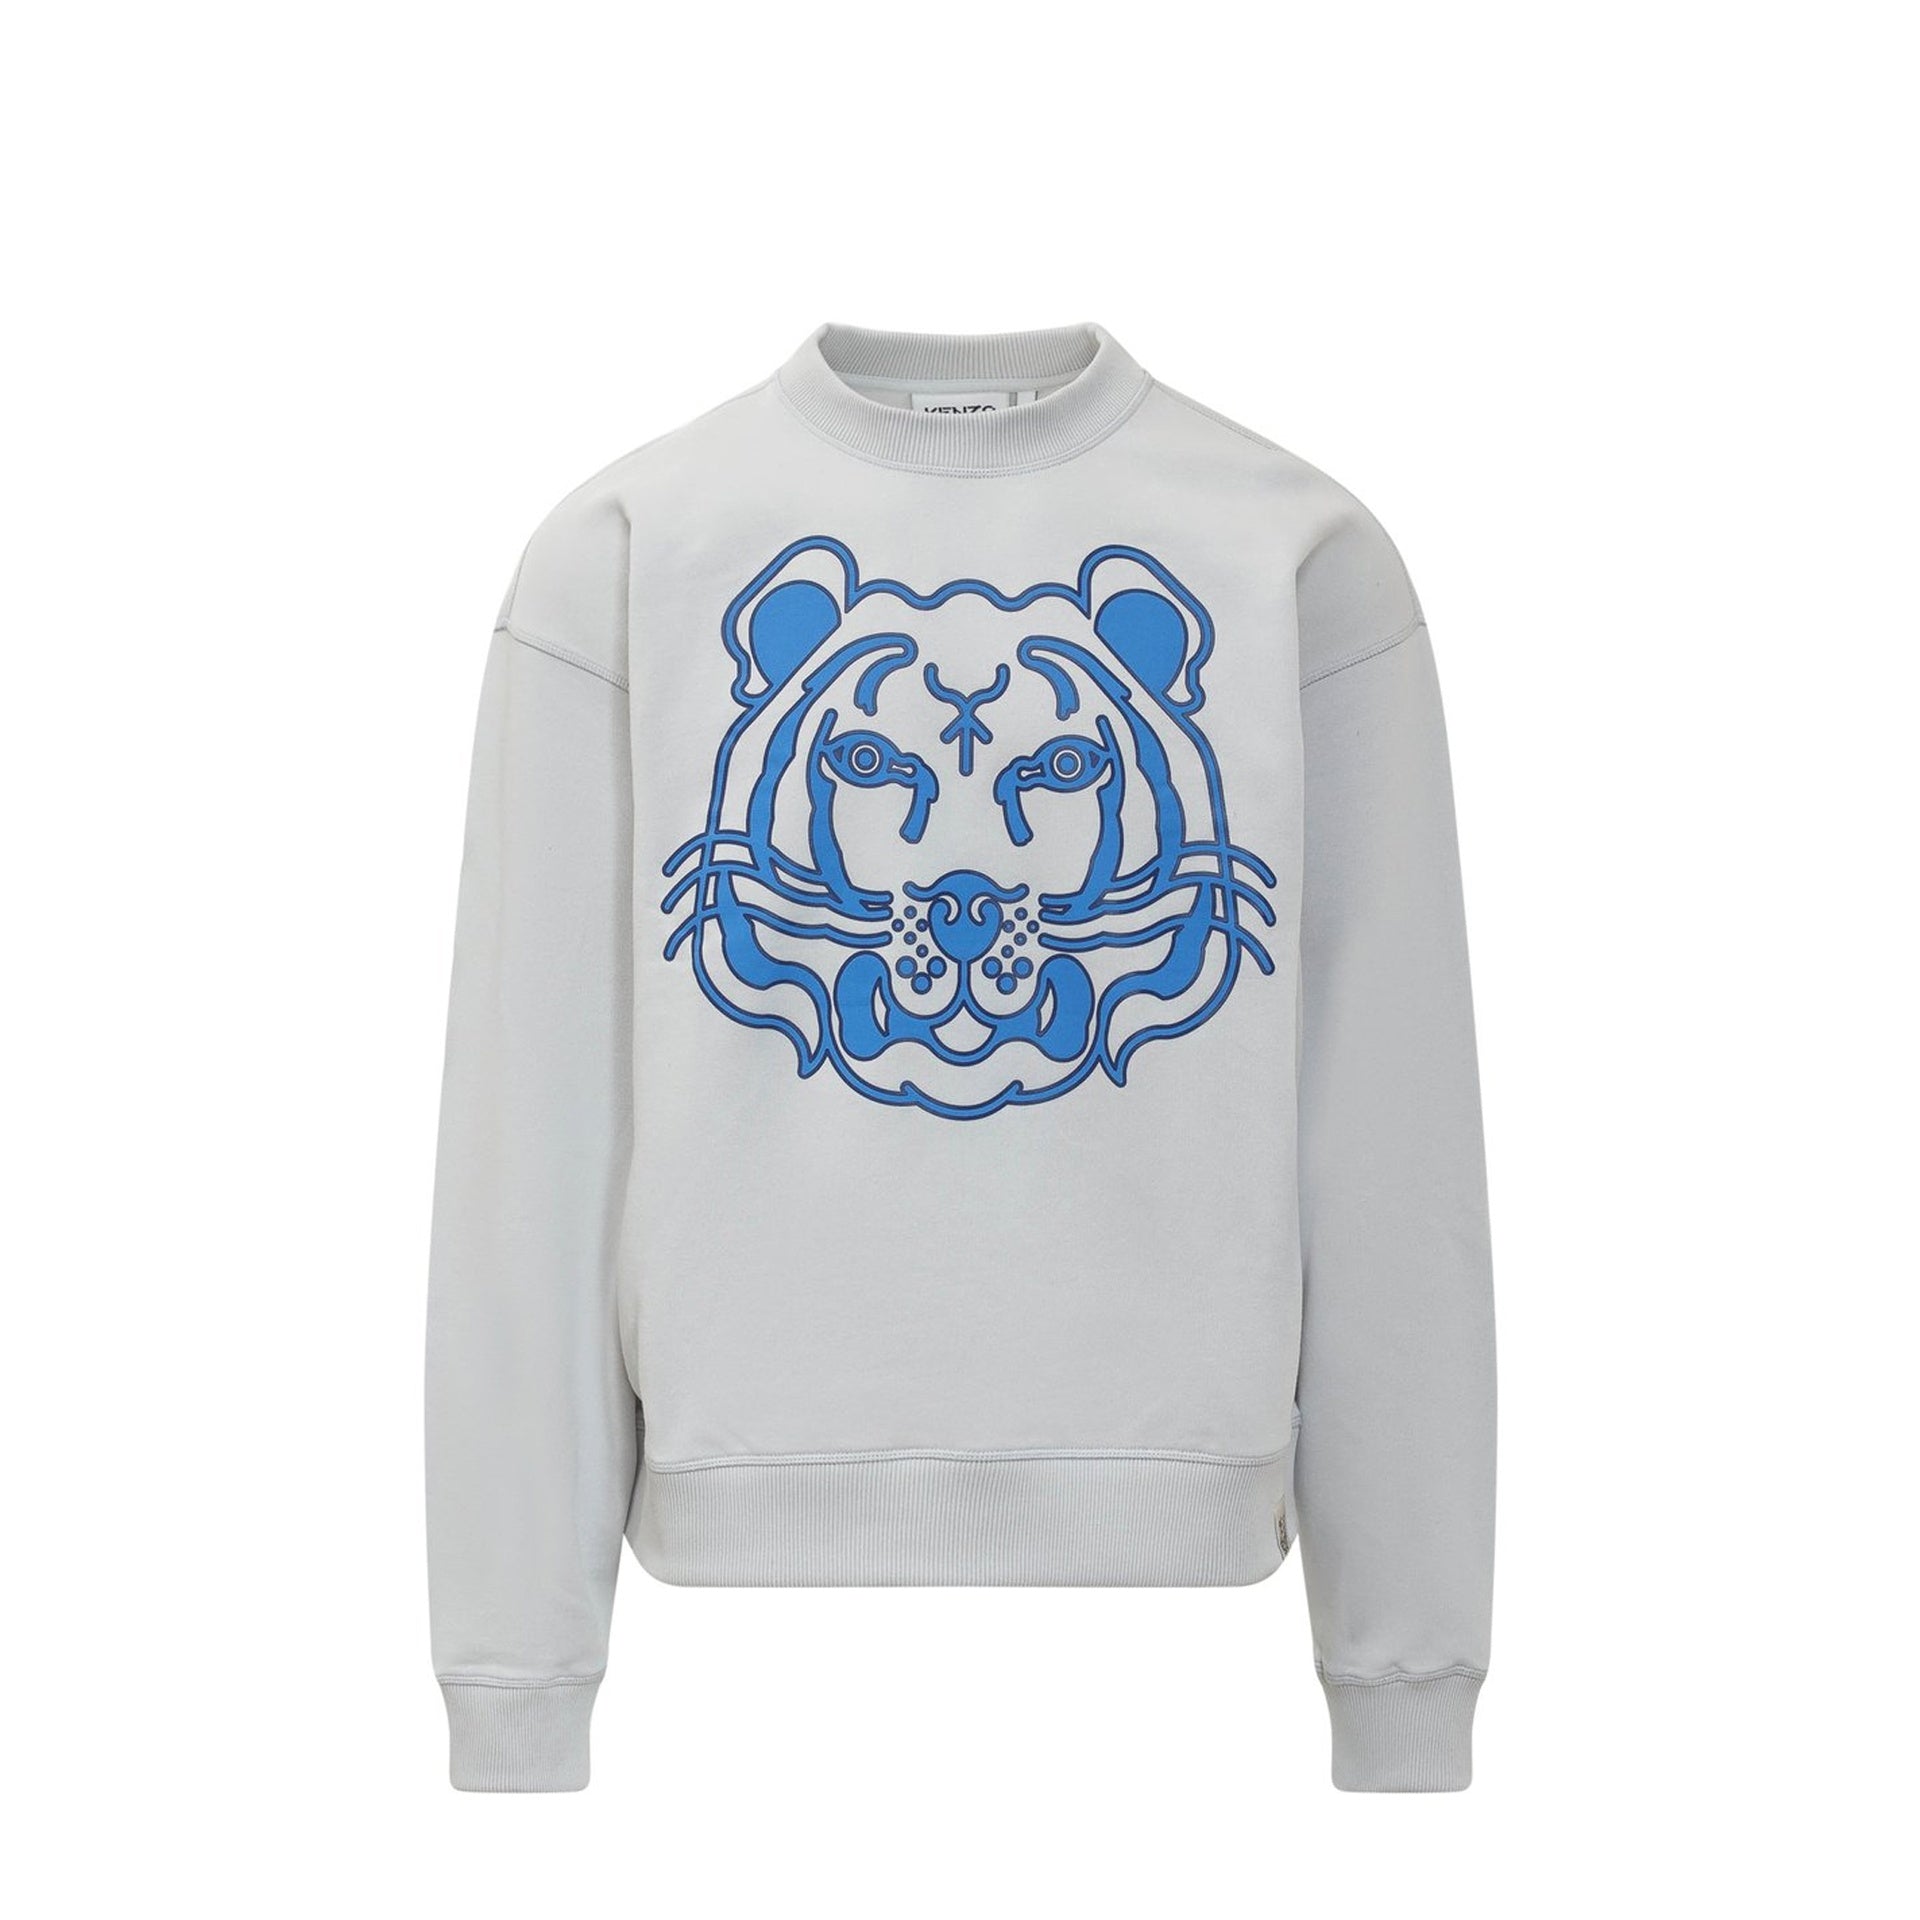 KENZO-OUTLET-SALE-Kenzo-Printed-Tiger-Sweatshirt-Shirts-GREY-S-ARCHIVE-COLLECTION.jpg